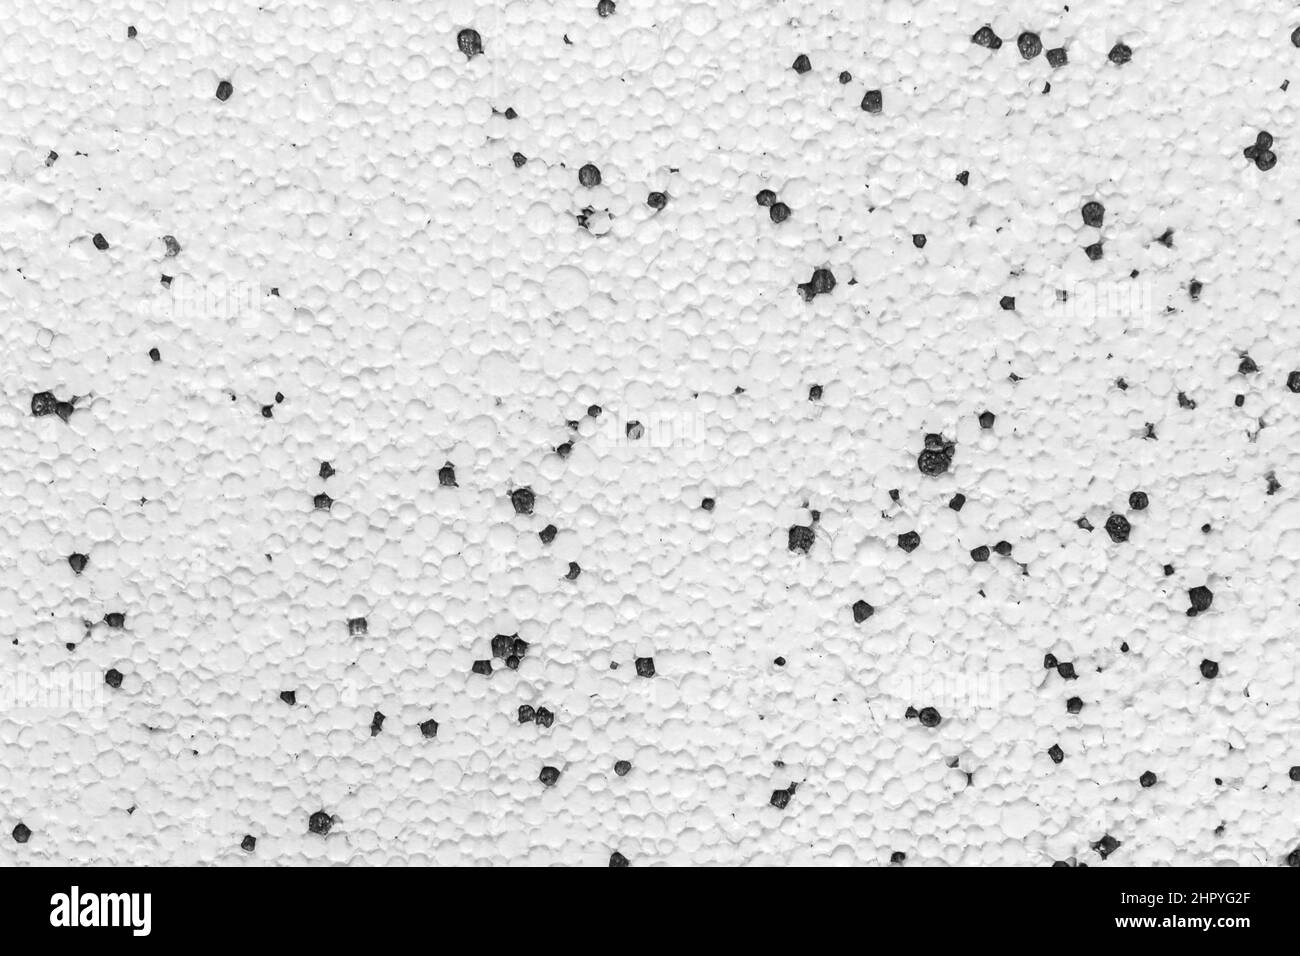 Foam block Black and White Stock Photos & Images - Alamy